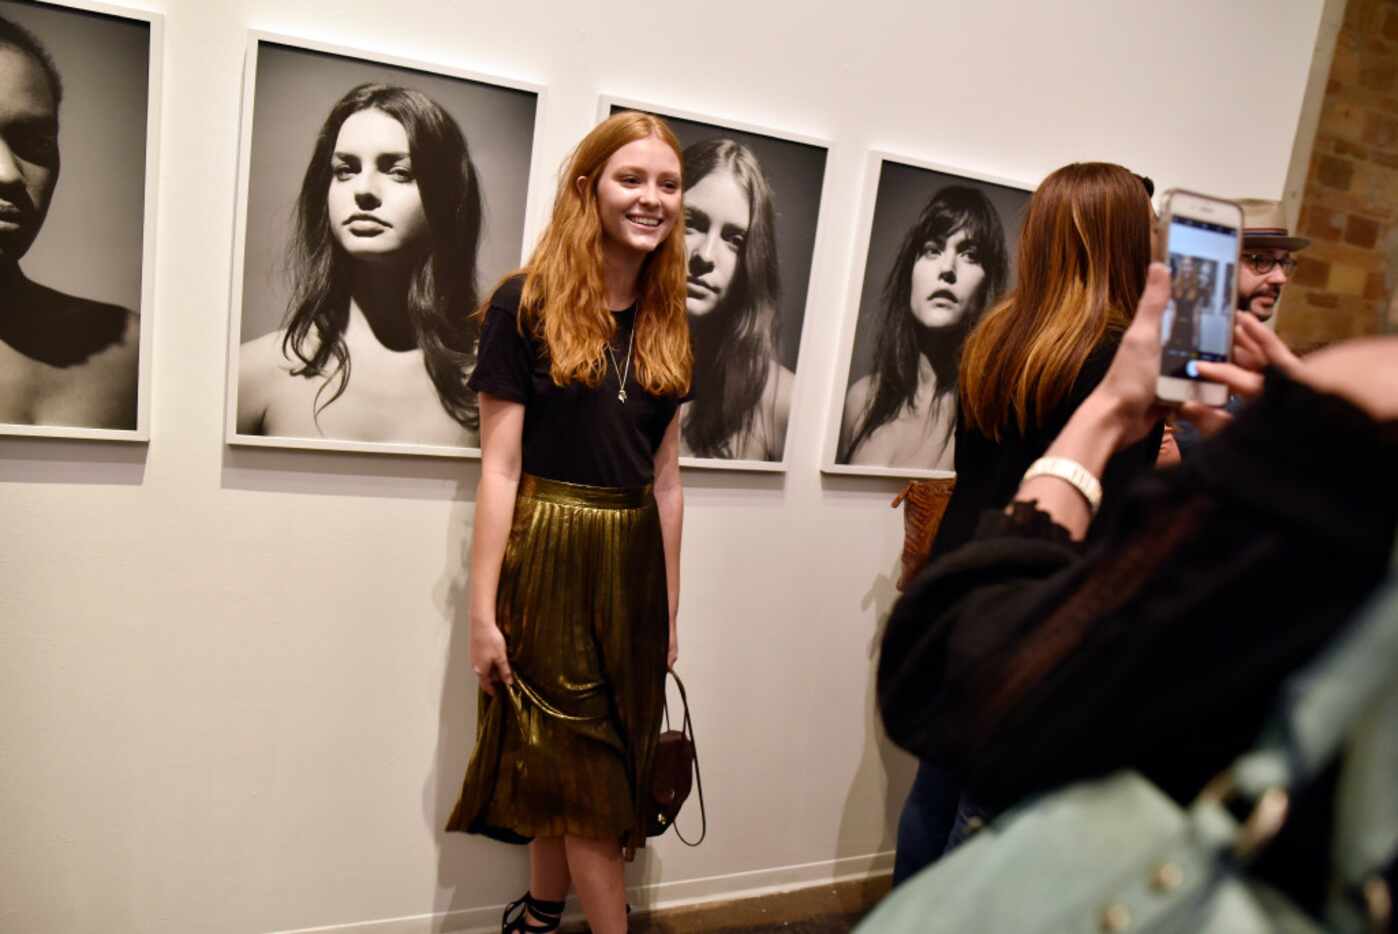 Model Haley Halter is photographed by her mother Laurel Halter next to her image by Fredrik...